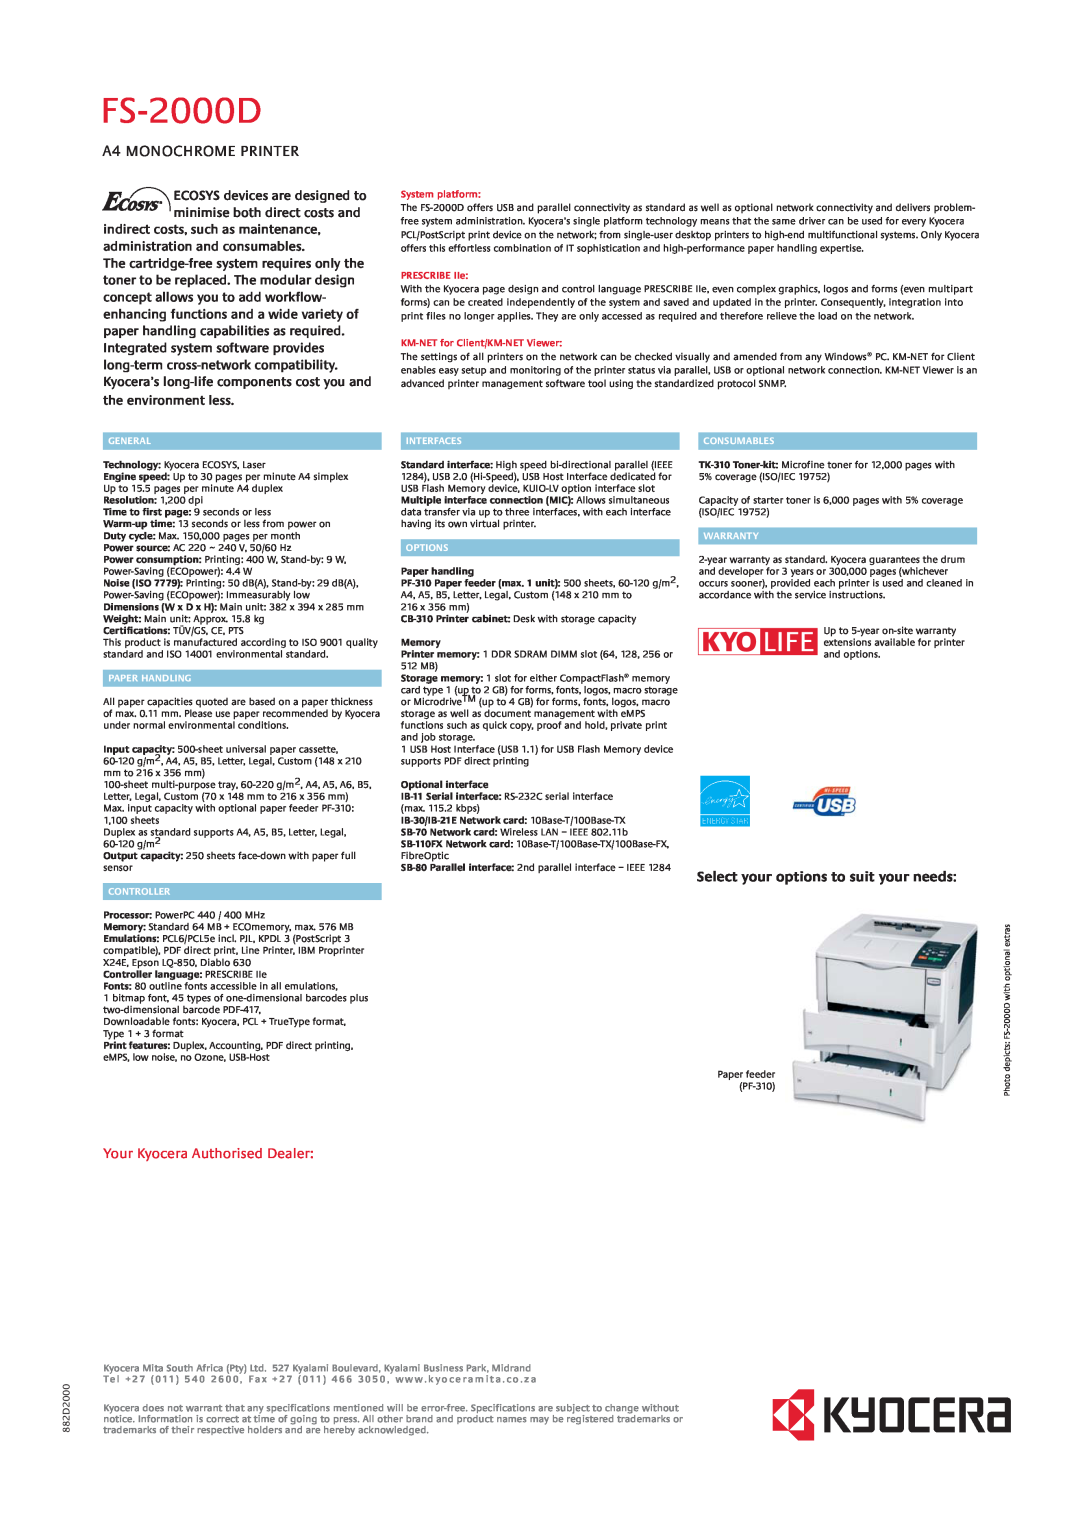 Kyocera FS-2000D, A4 MONOCHROME PRINTER, Select your options to suit your needs, Your Kyocera Authorised Dealer, Memory 